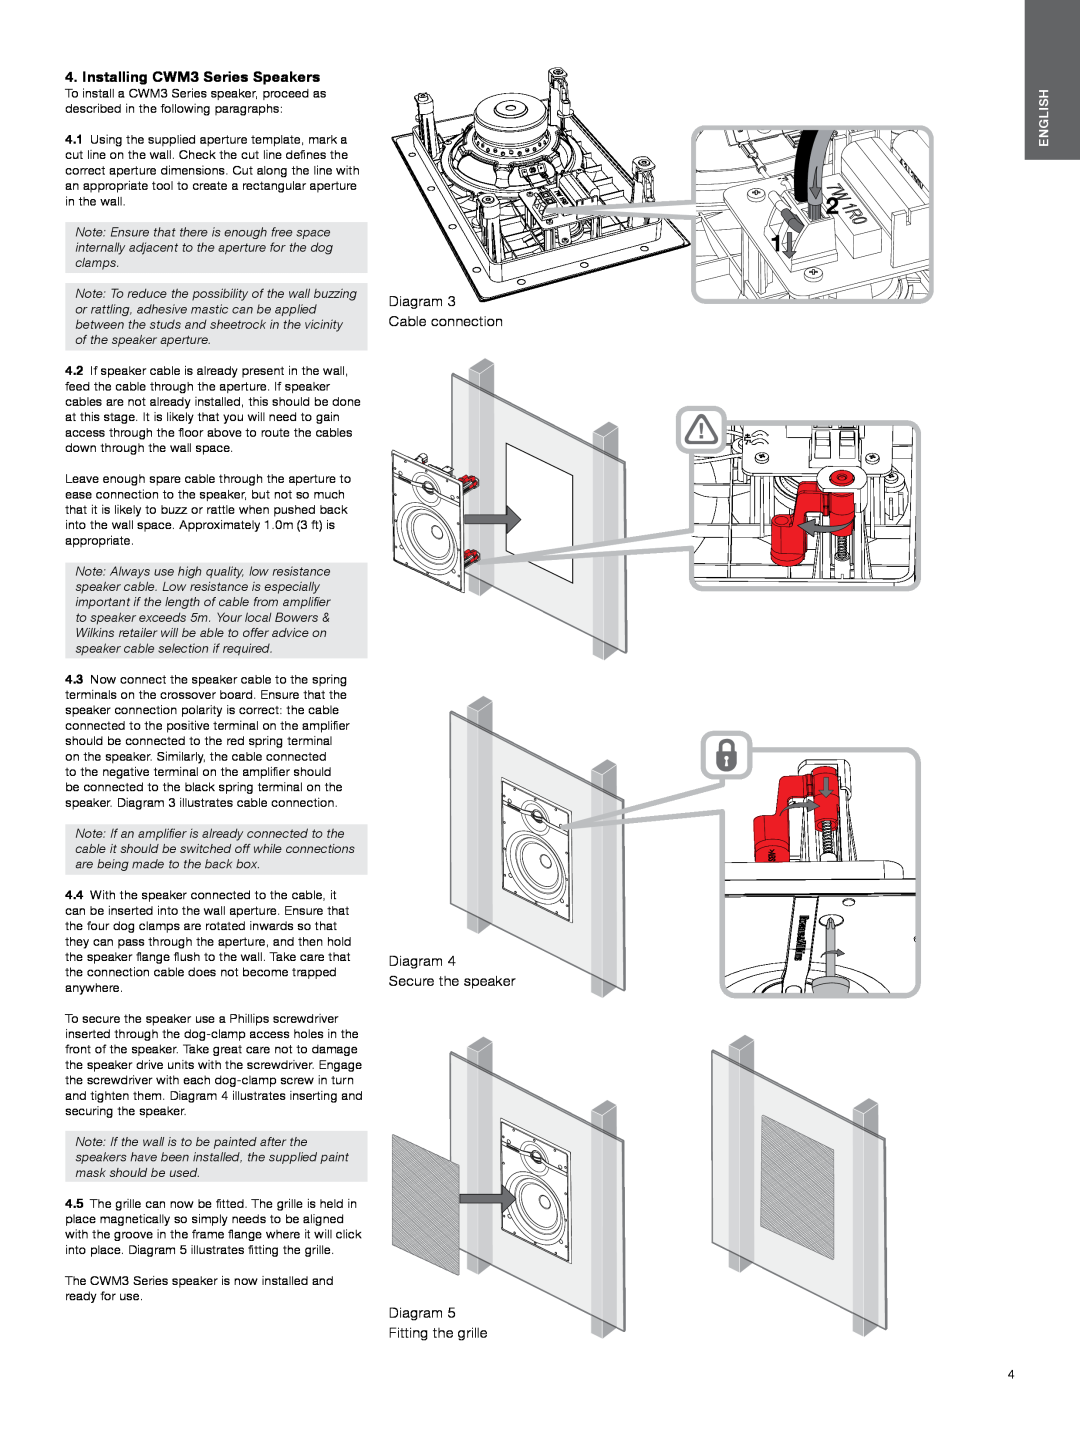 Bowers & Wilkins manual Installing CWM3 Series Speakers, Diagram Cable connection Diagram 